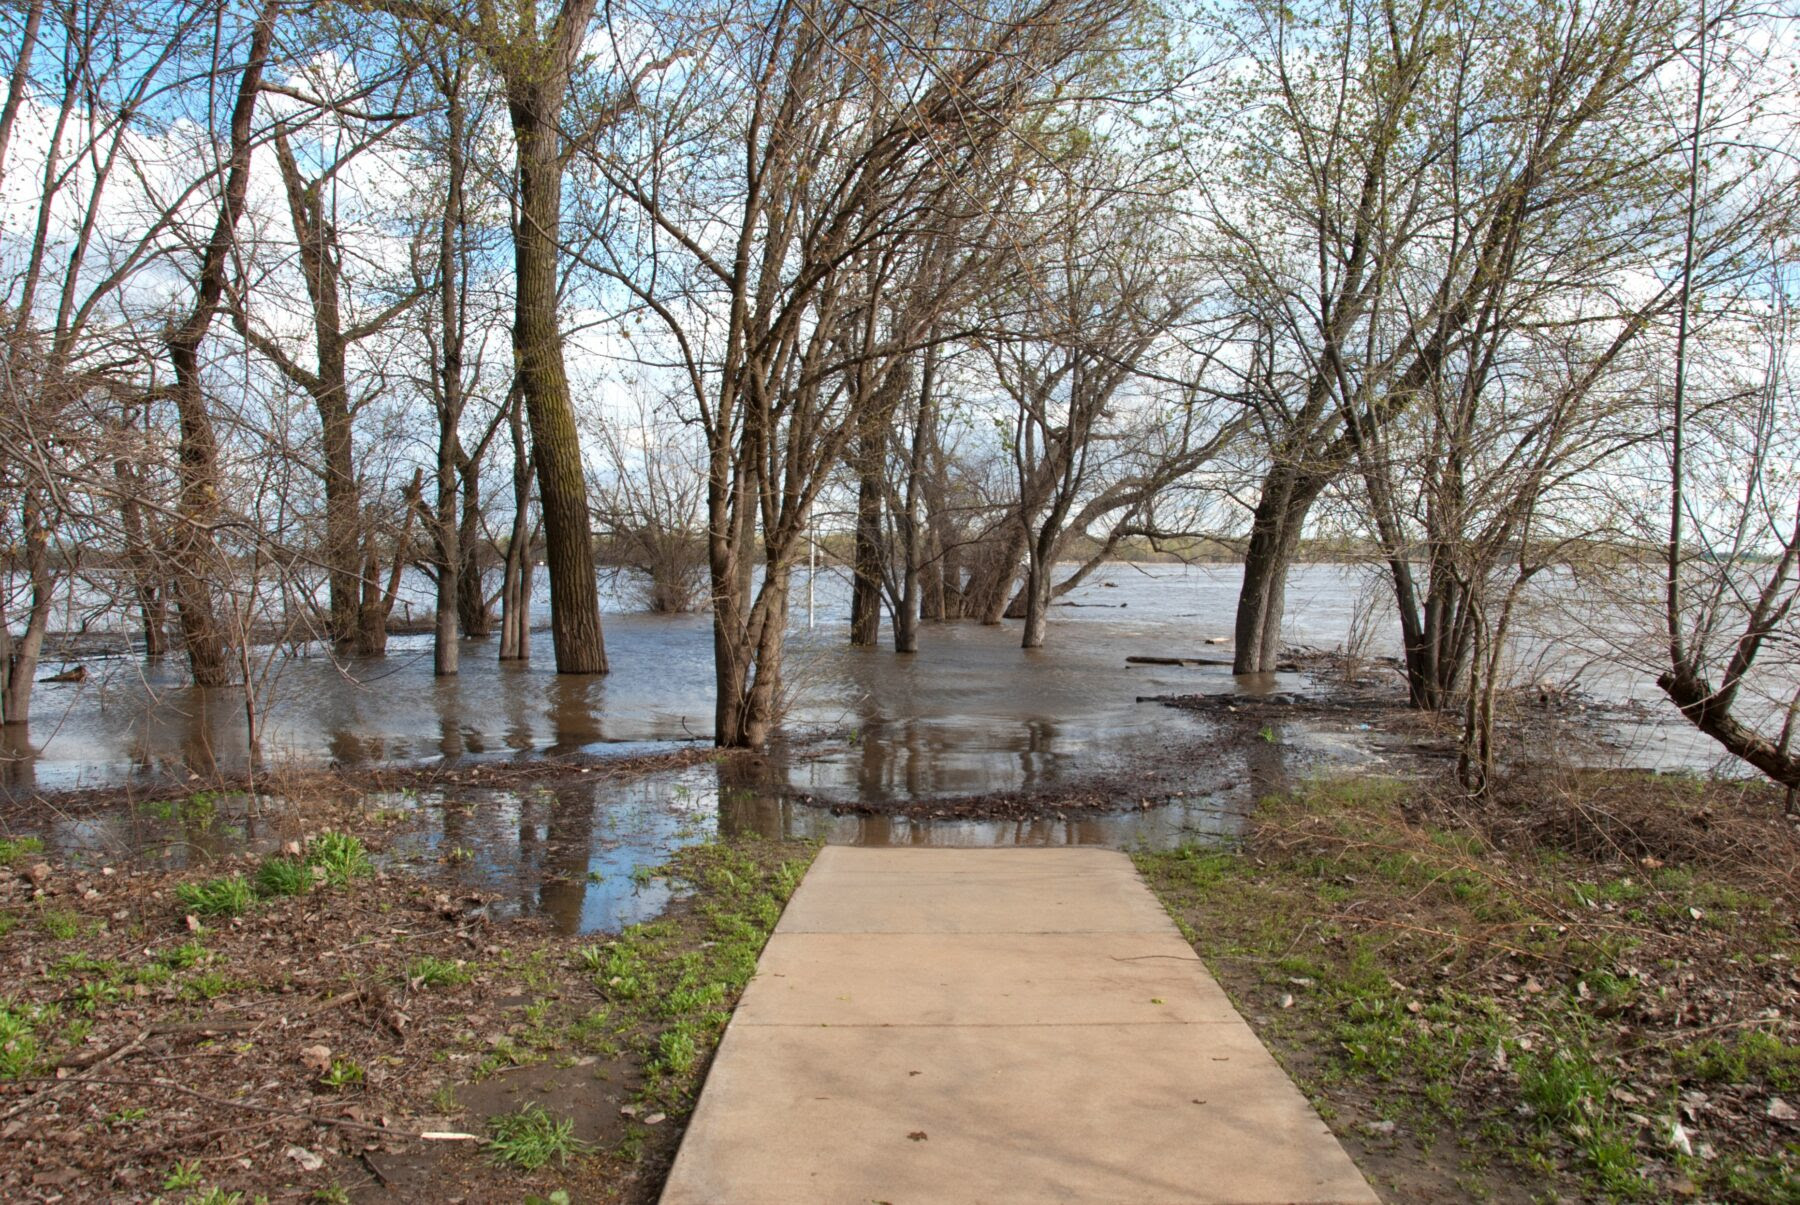 How Flooding Has Impacted the MissouriMississippi Confluence Terrain